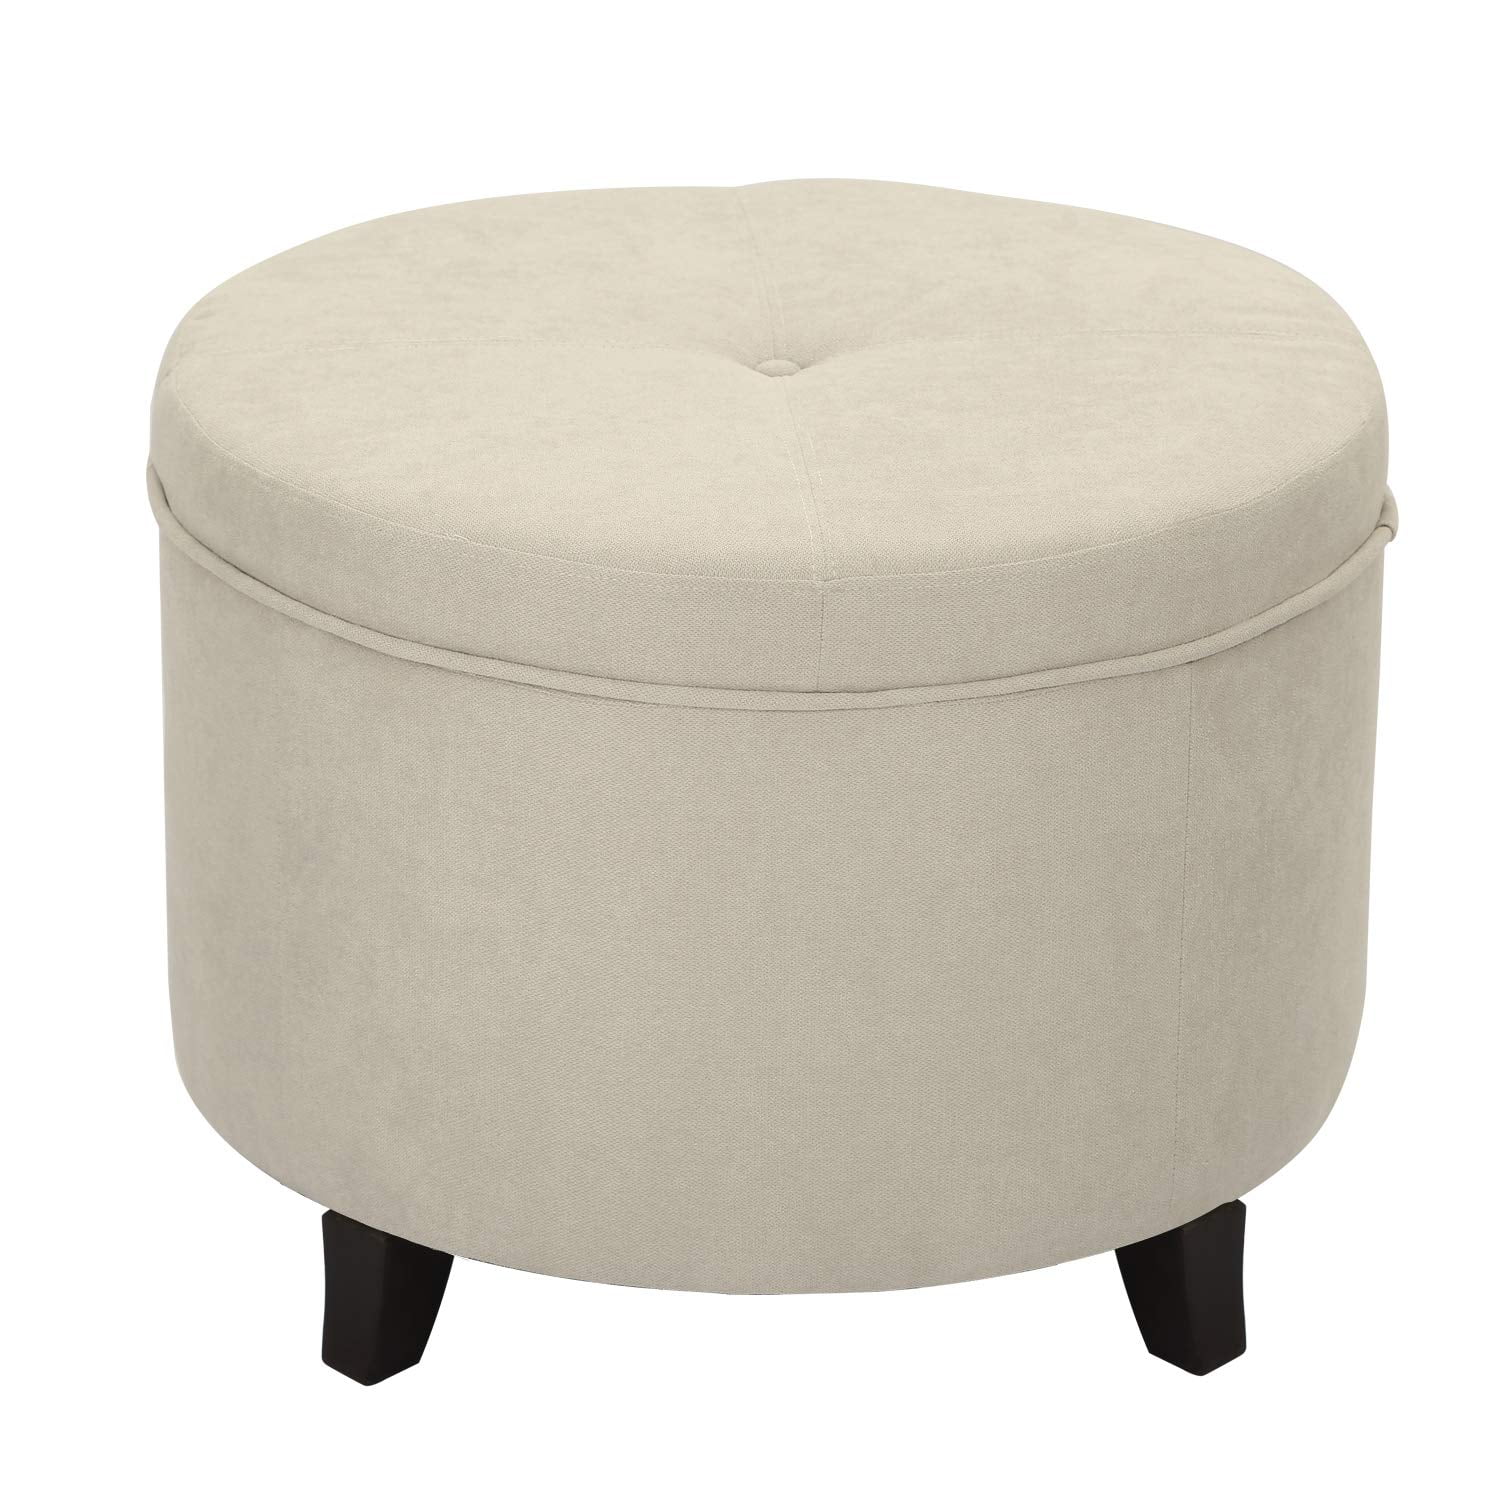 Adeco Round Ottoman, Fabric Foot Rest and Seat, Modern Button Tufted